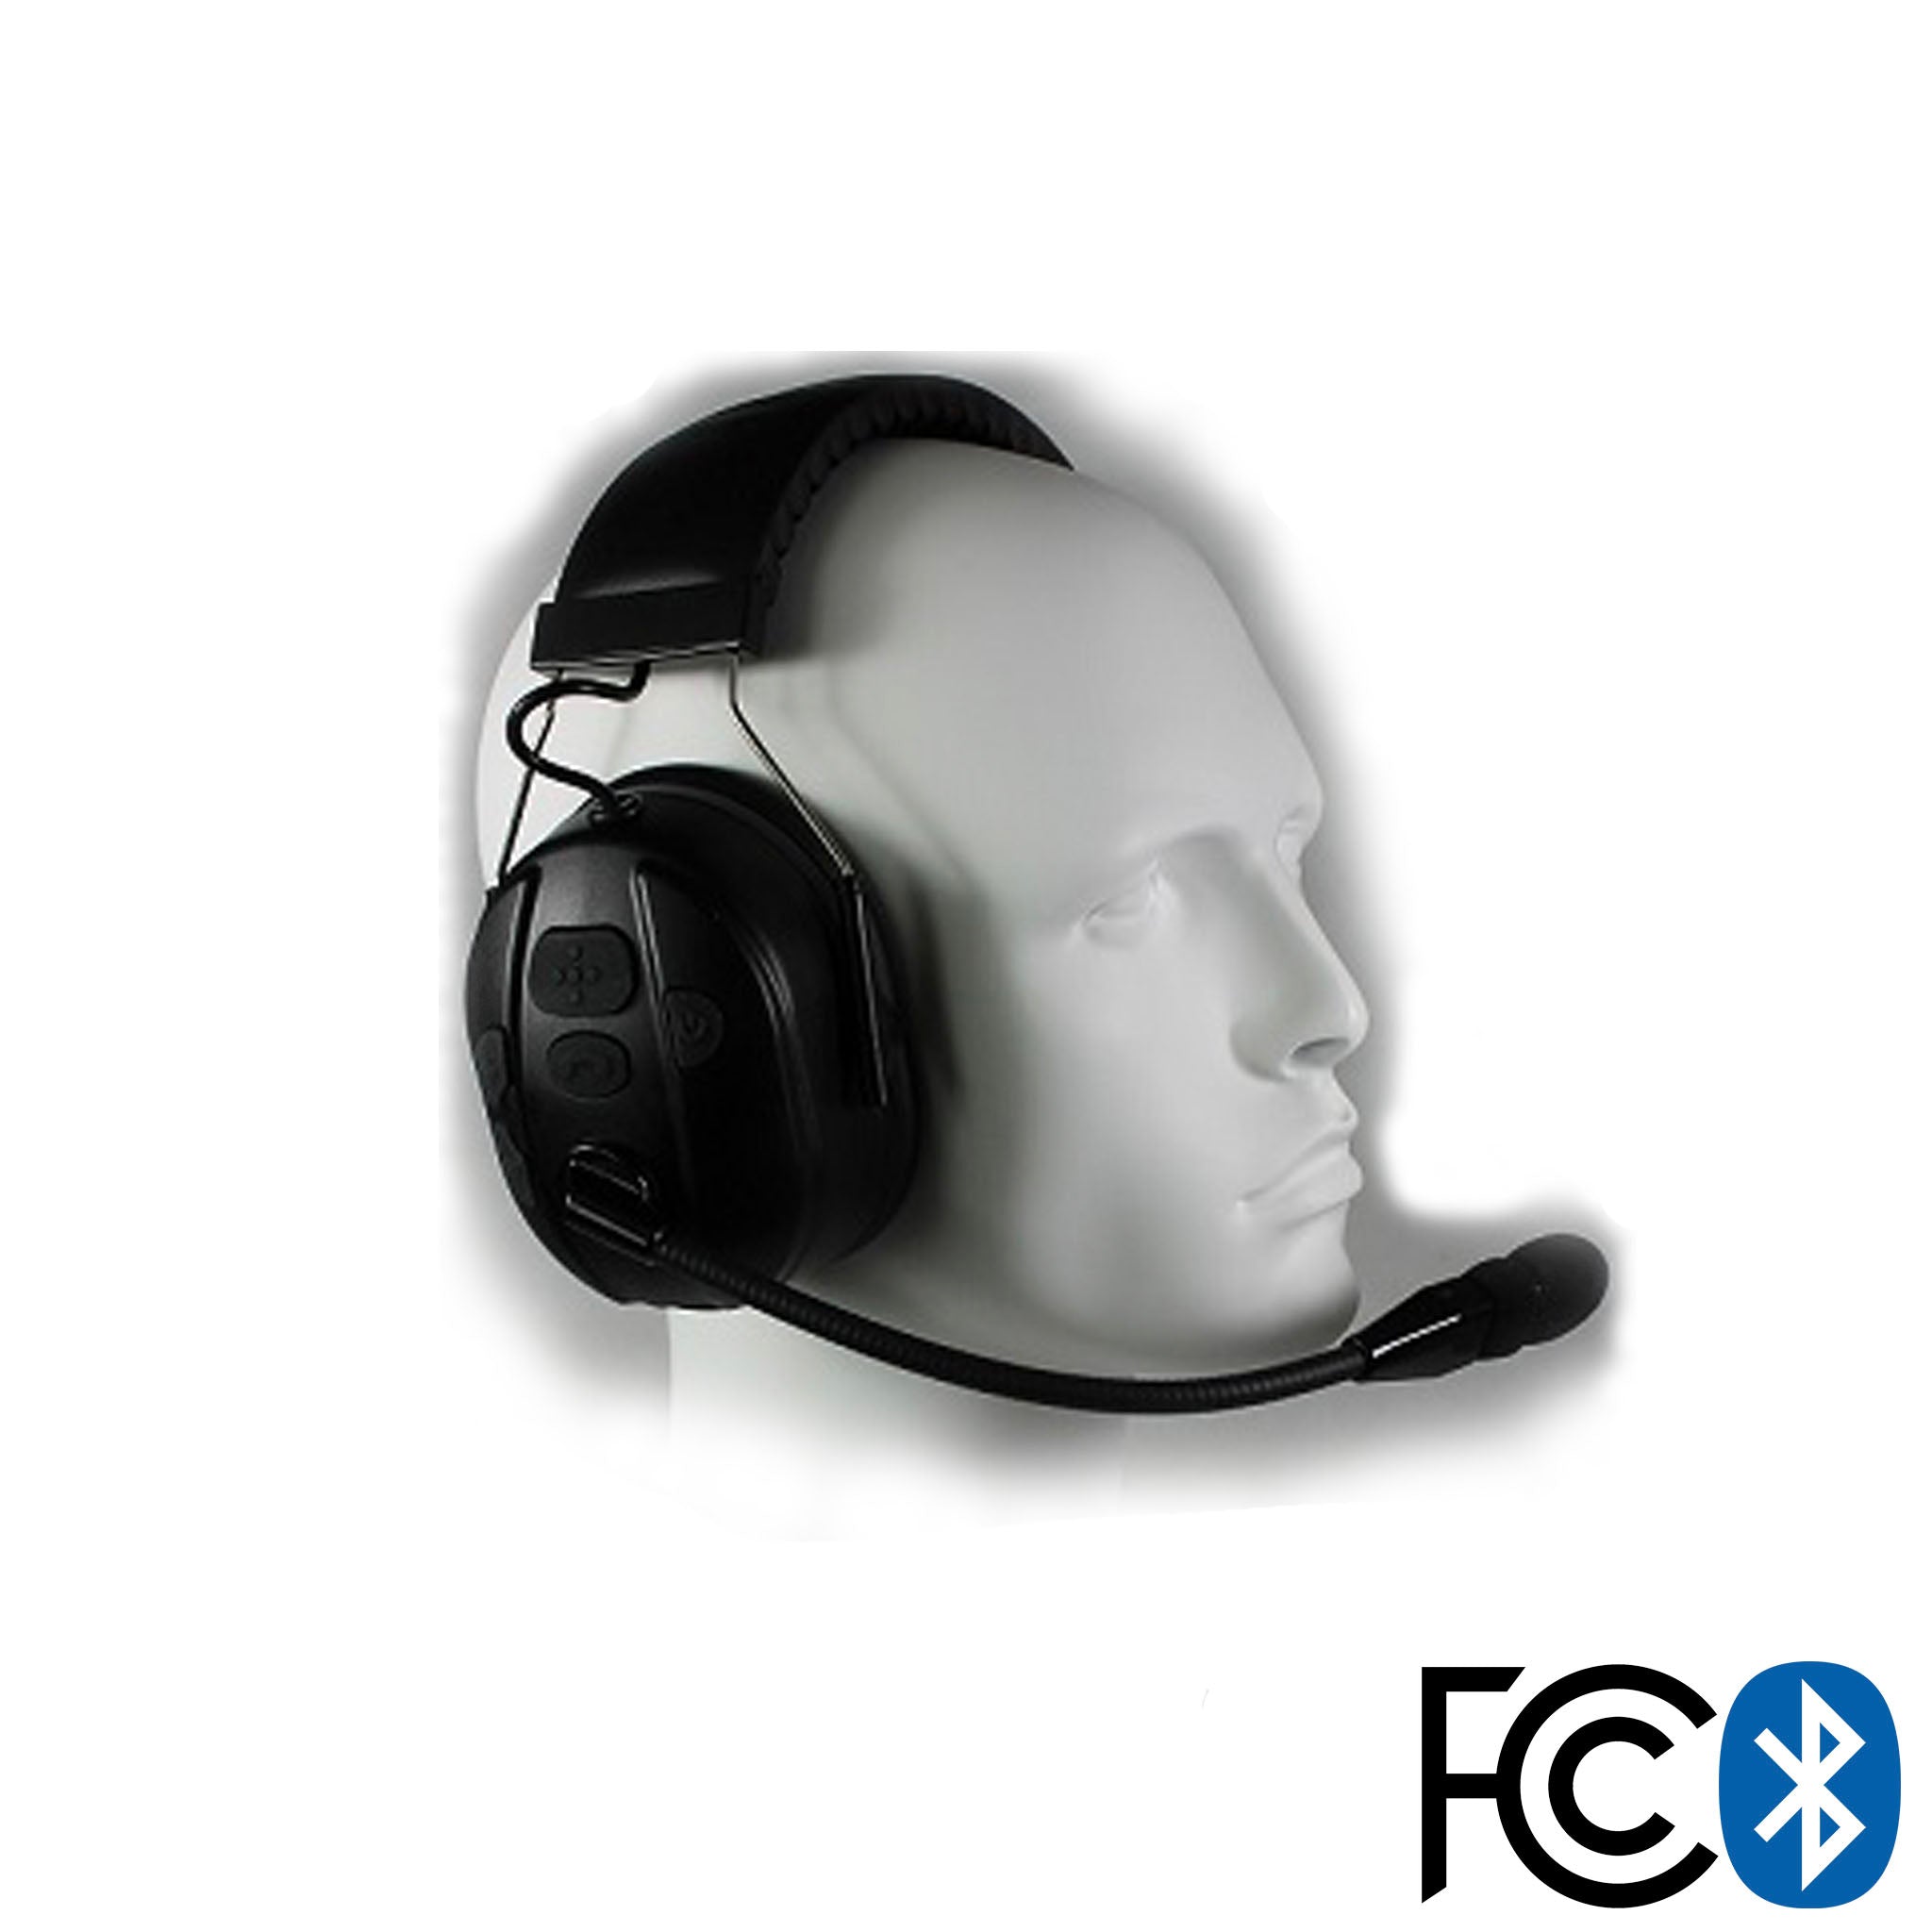 Headset for Safety/Construction No Adapter – Comm Gear